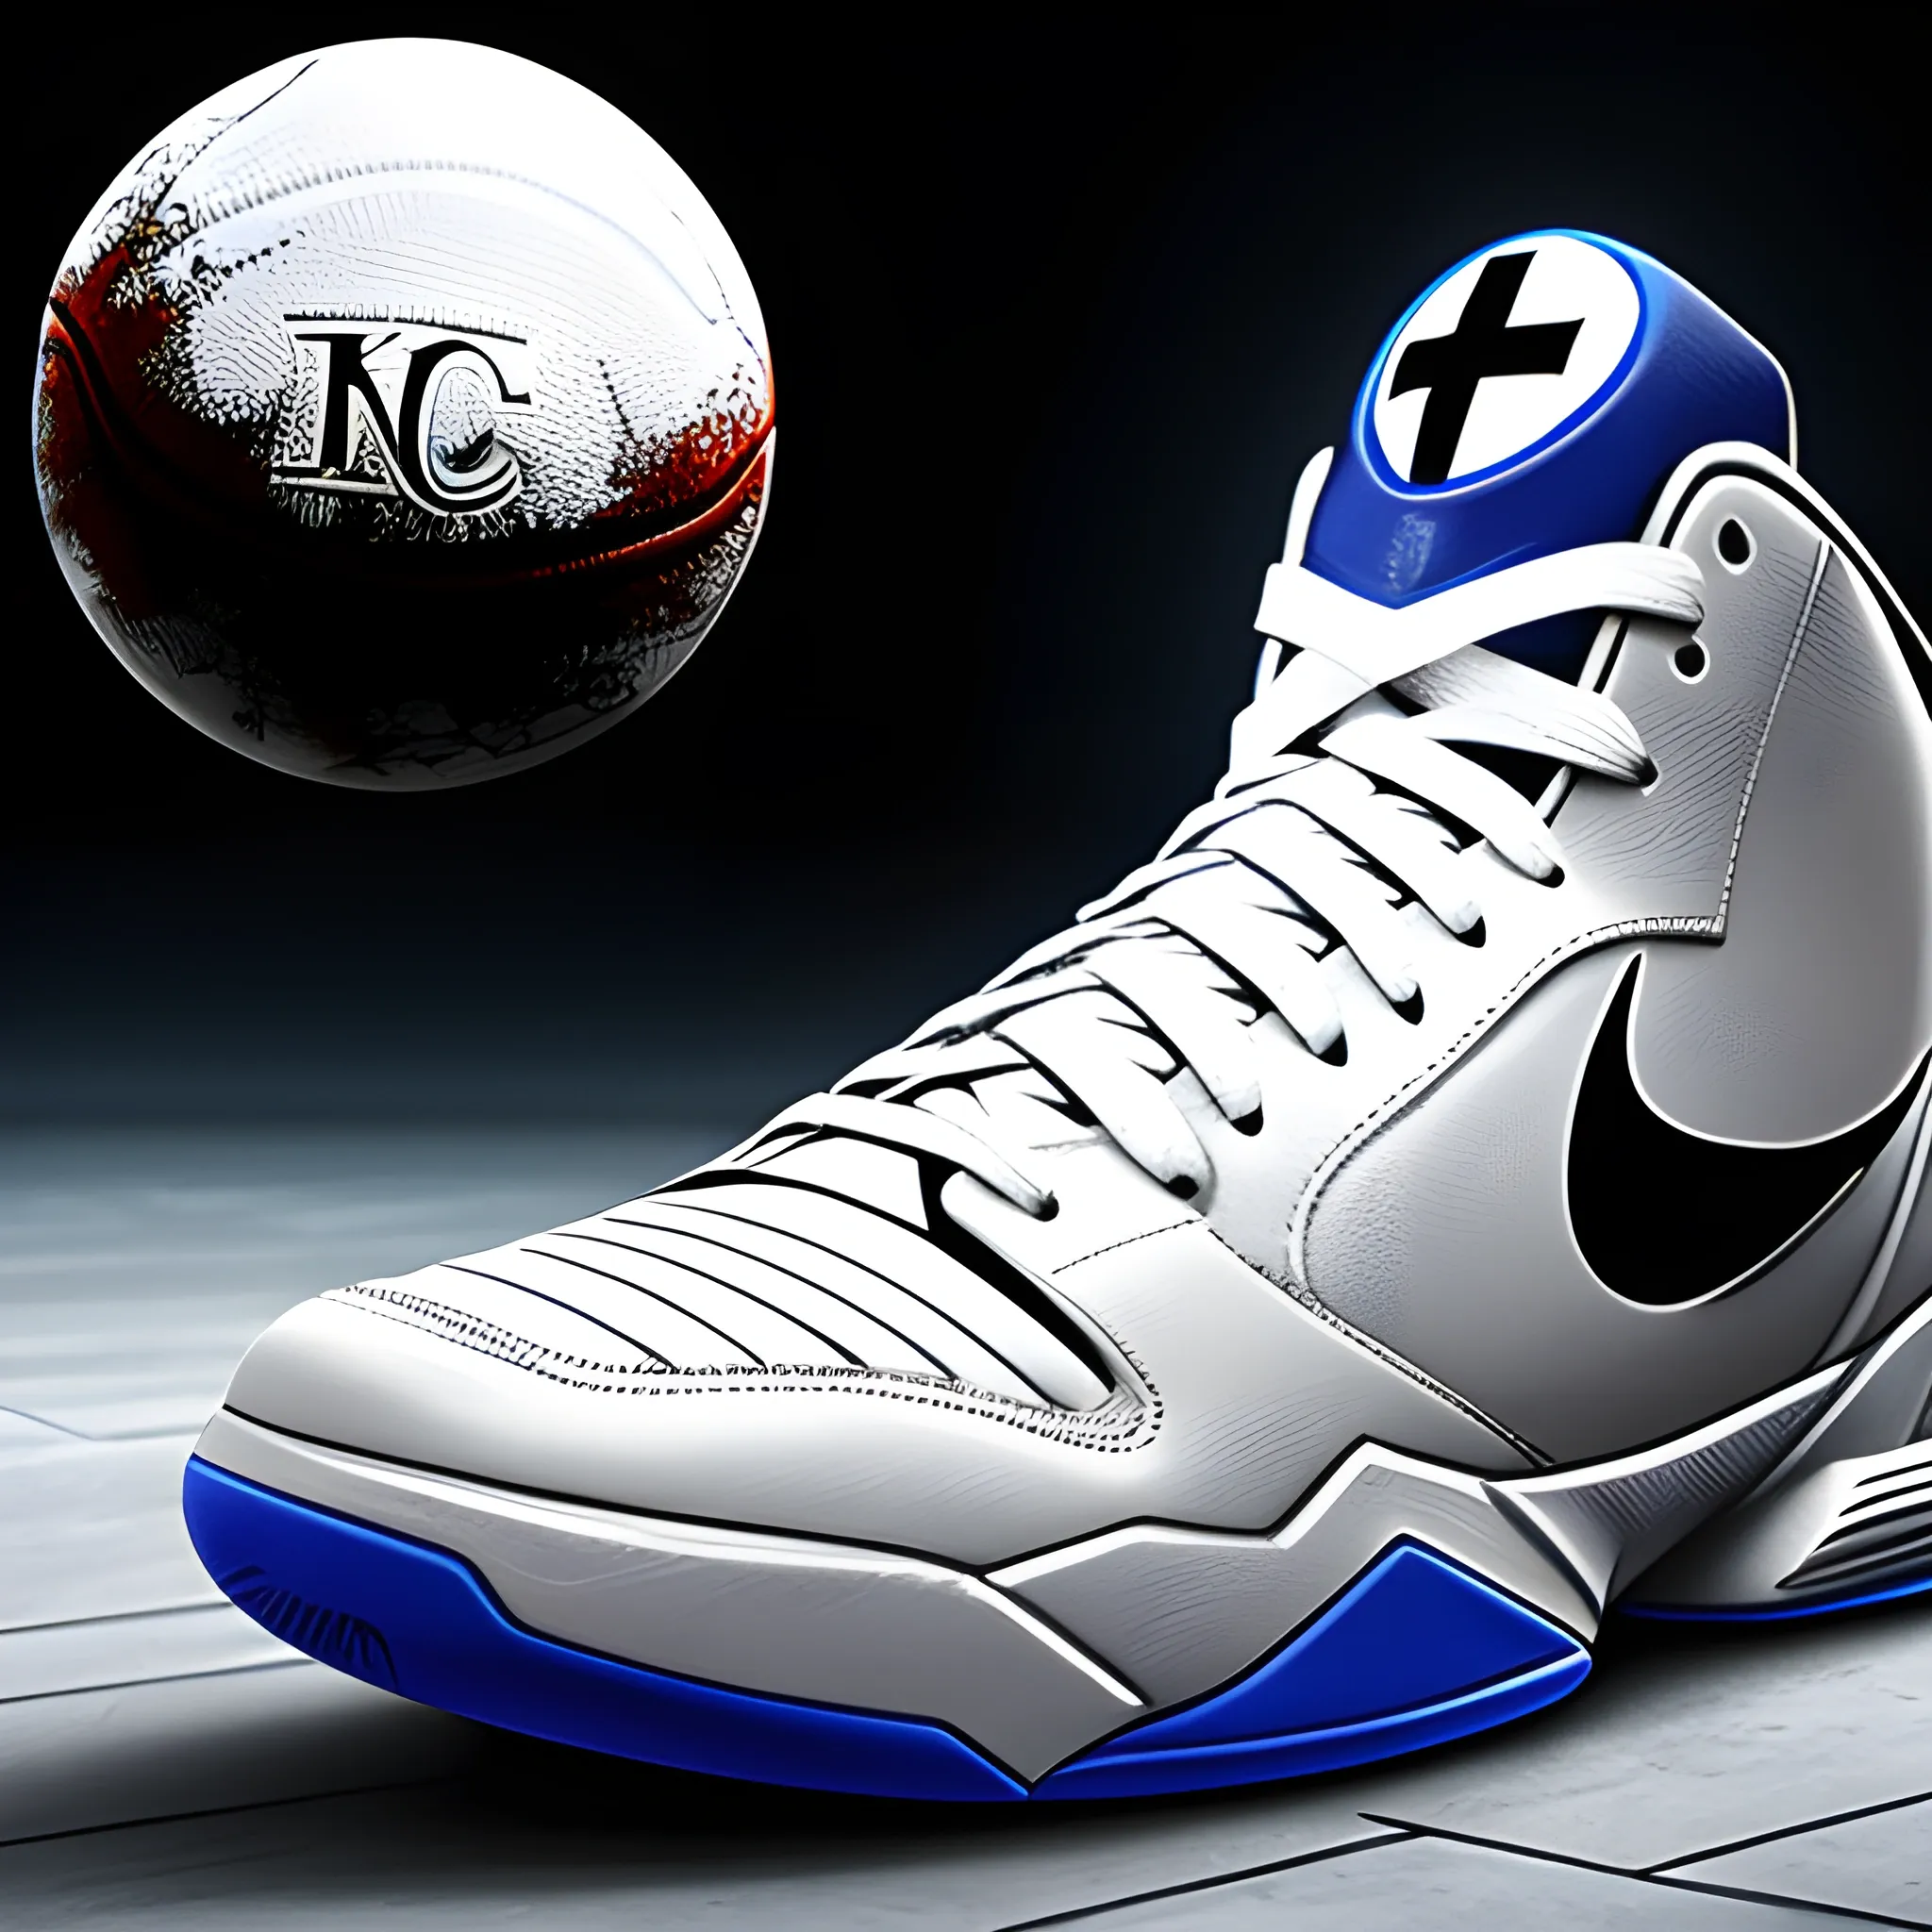 Concept Moon Knight basketball sneakers, popular in art station, smooth, sharp focus
